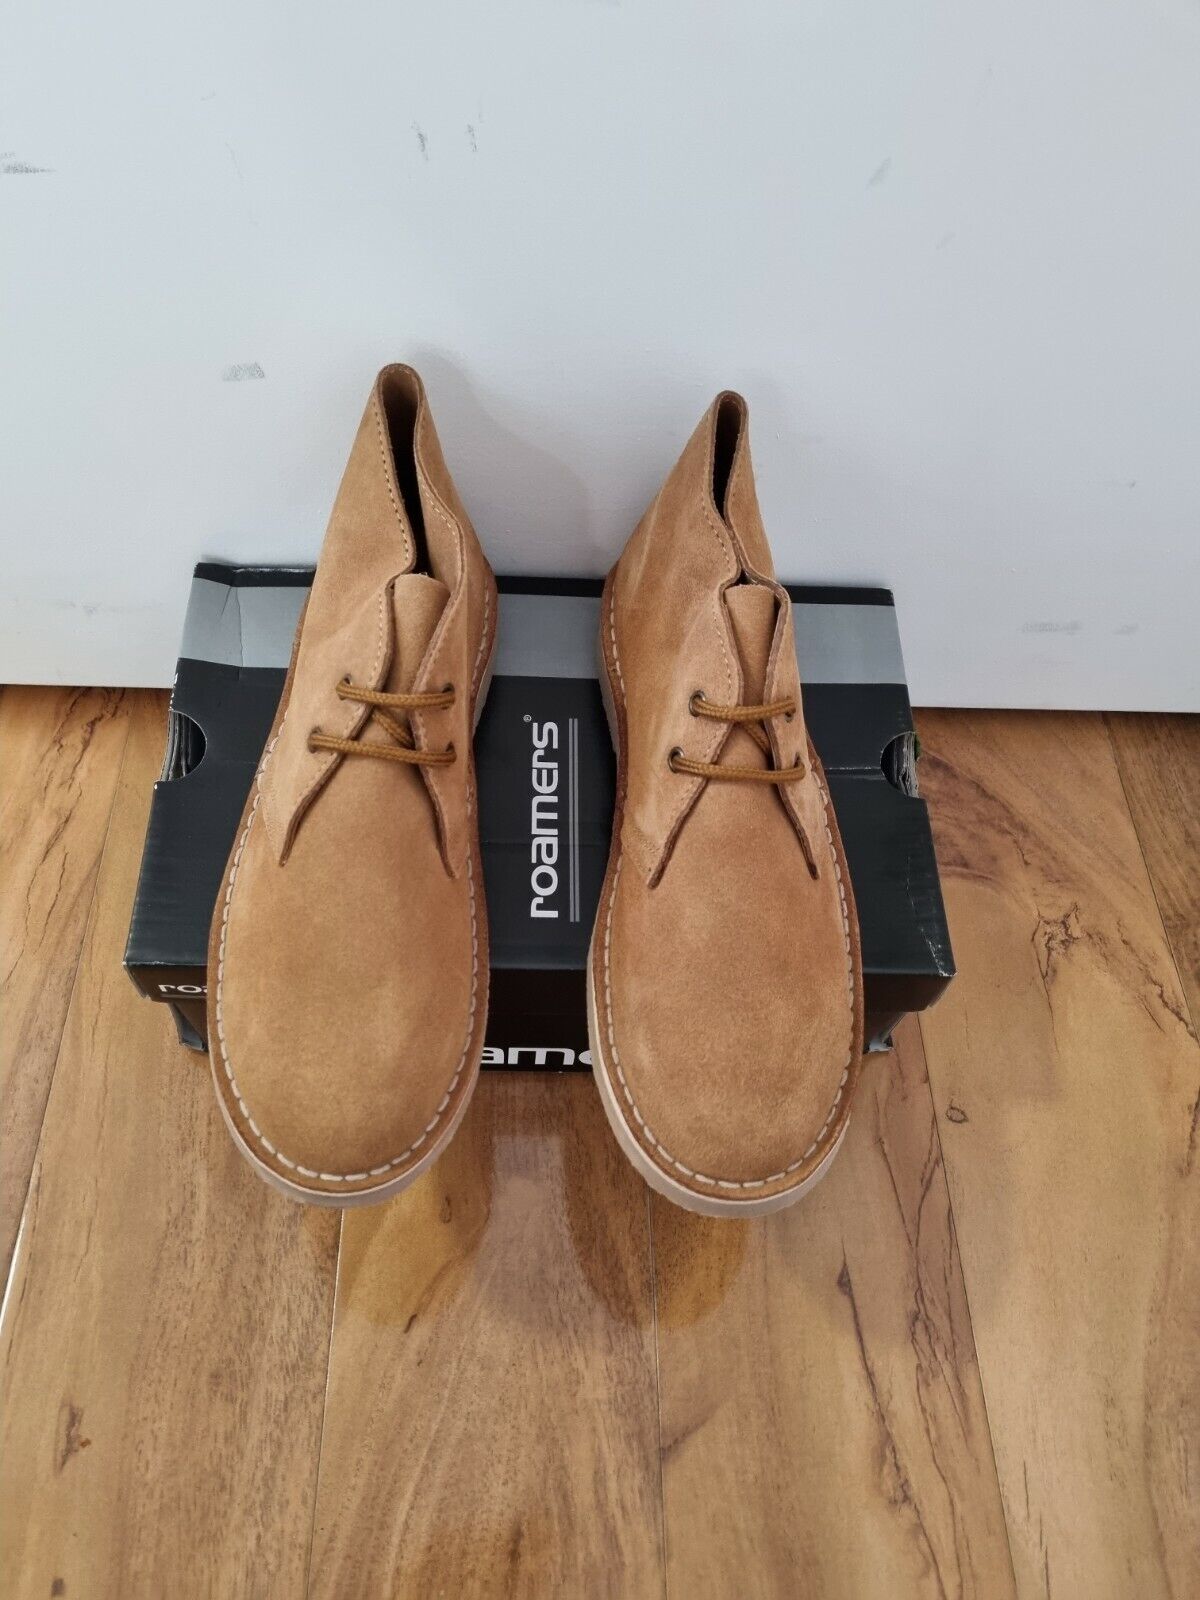 Desert Boot by Roamers - 2 Eye Sand Suede Leather (M467BS)